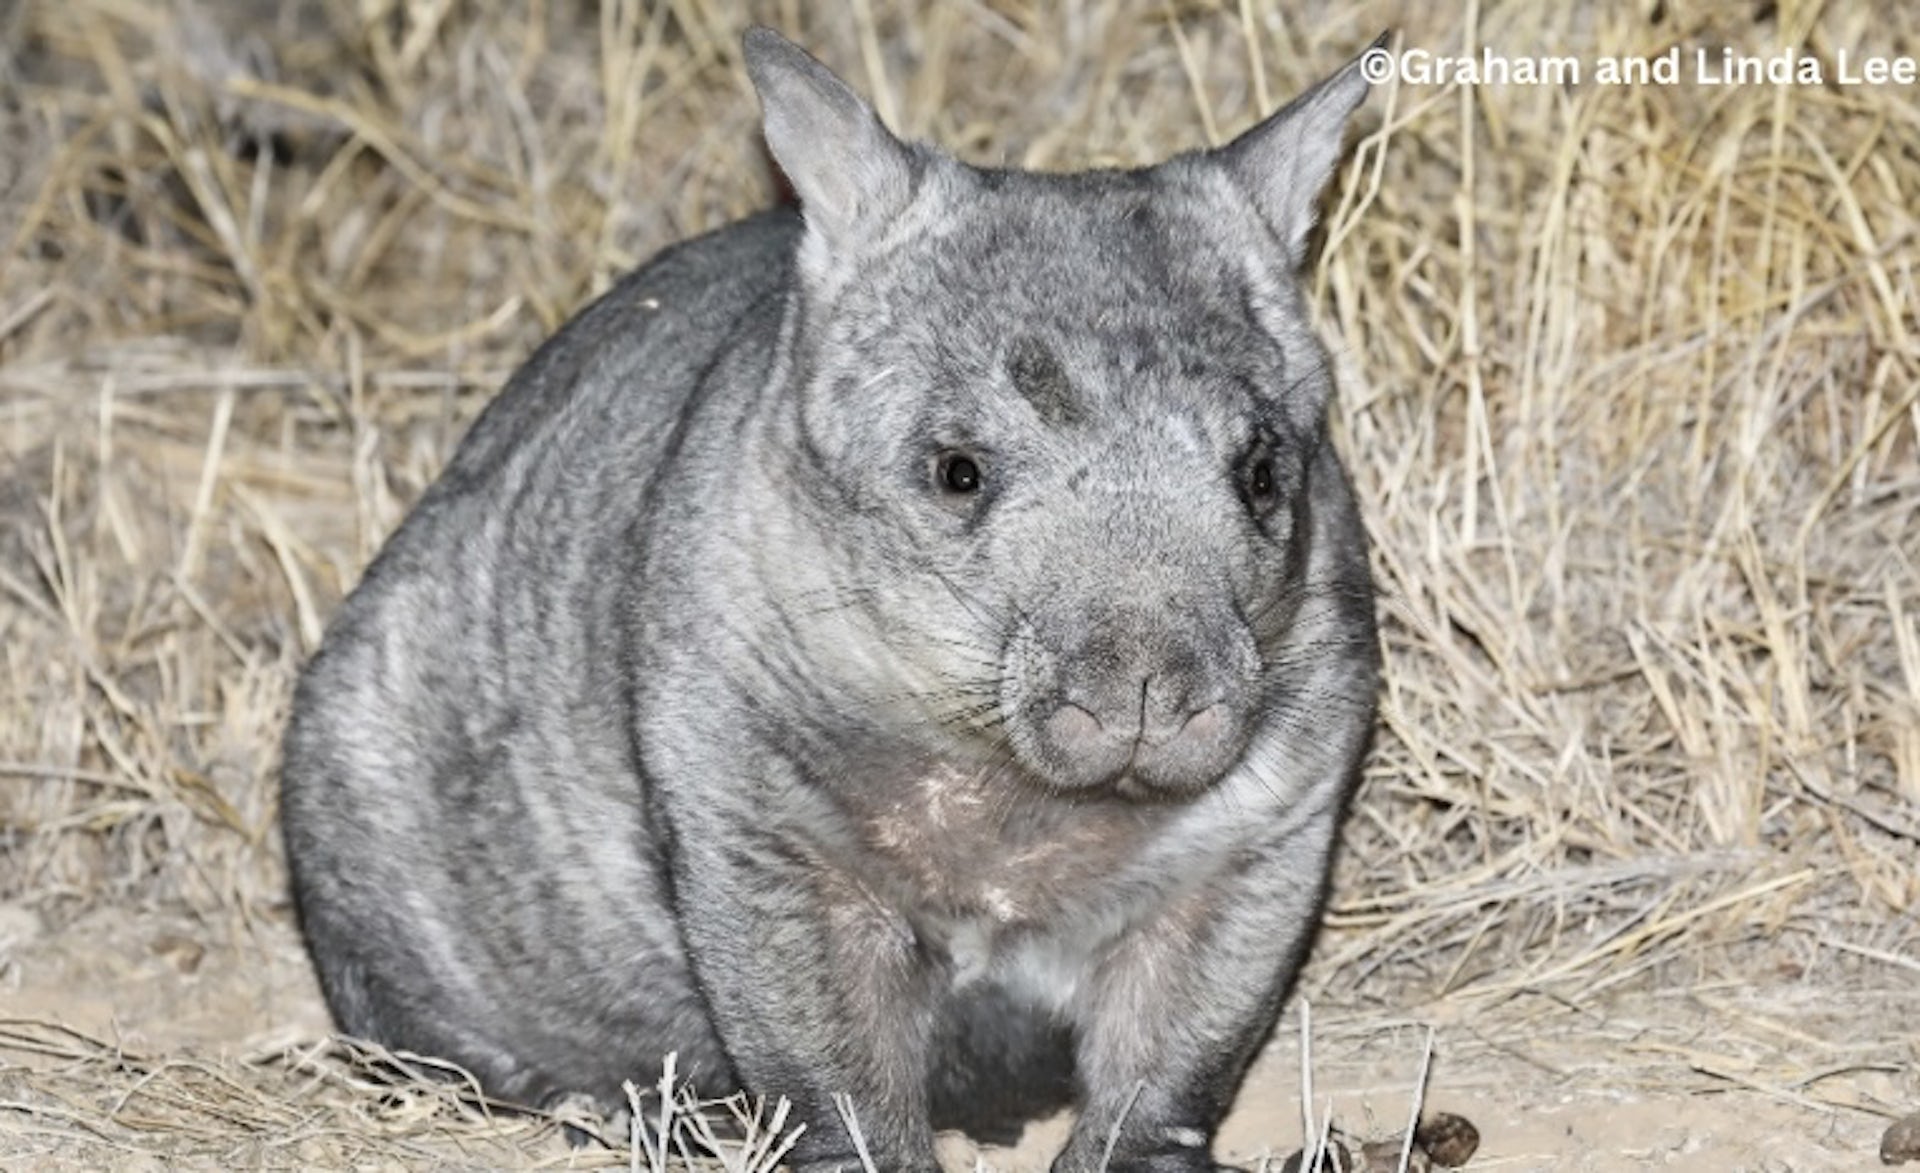 Citizen Scientists Uncover the Top Two Menaces to Wombats in Recent Data Analysis